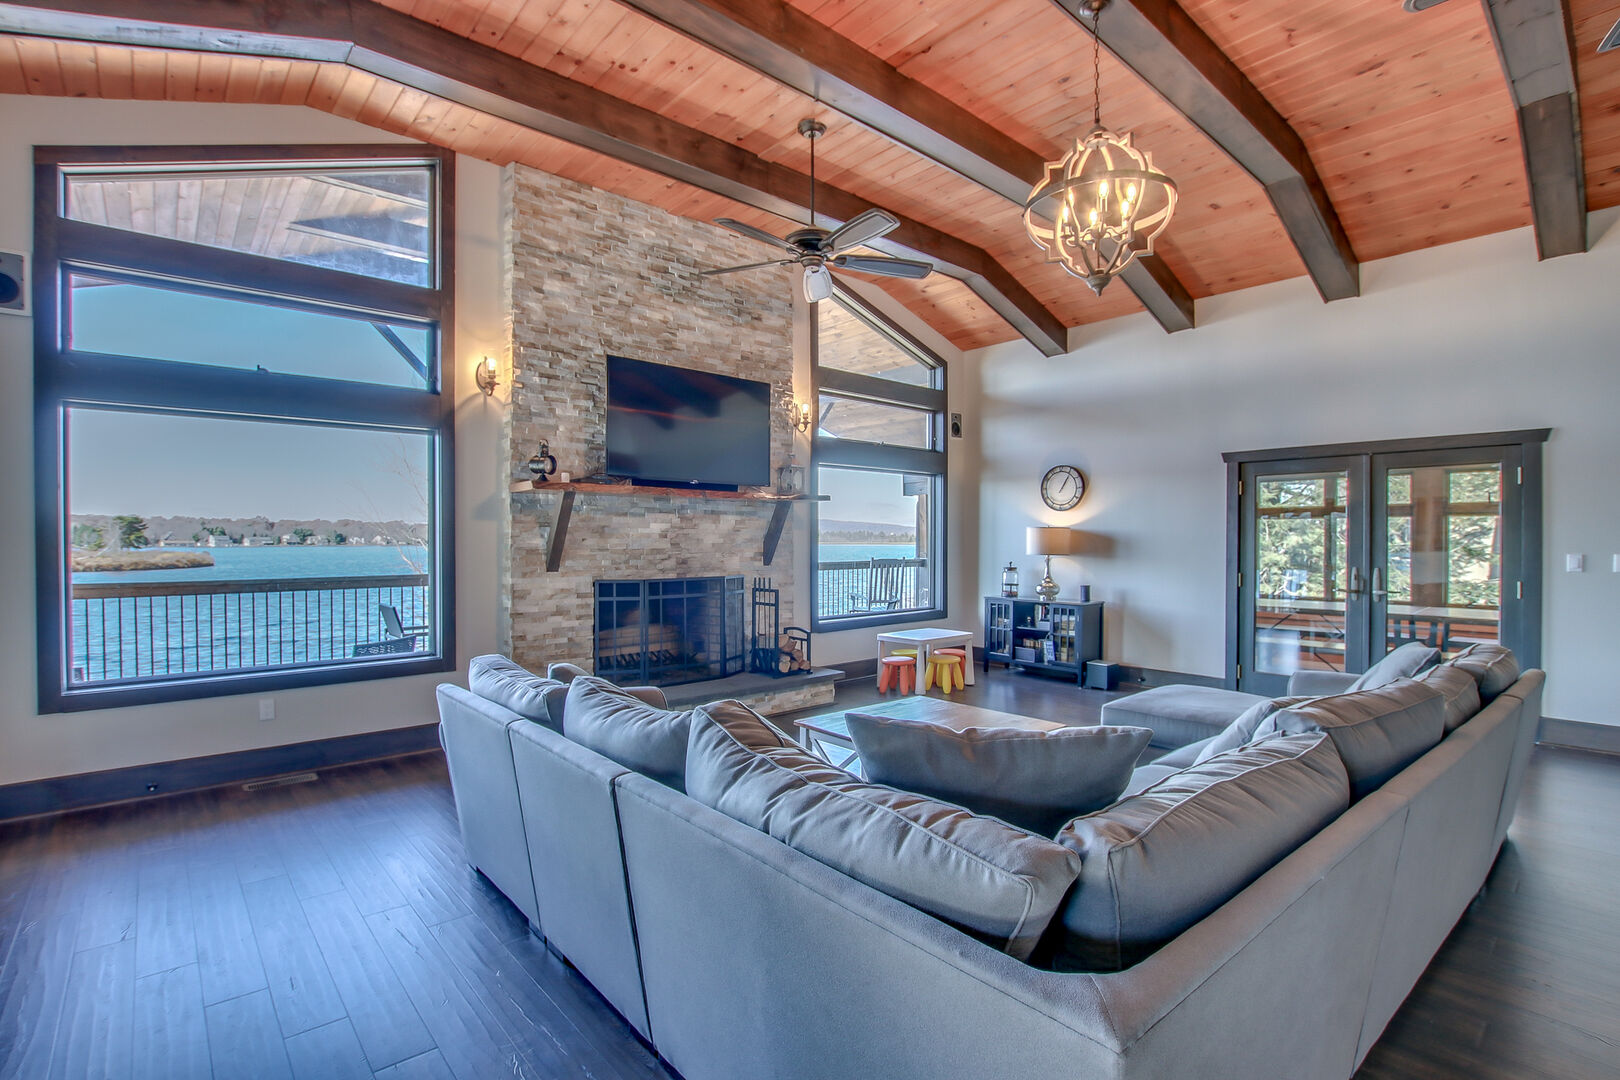 Great room with sectional couch, TV, fireplace, and large windows overlooking the lake.